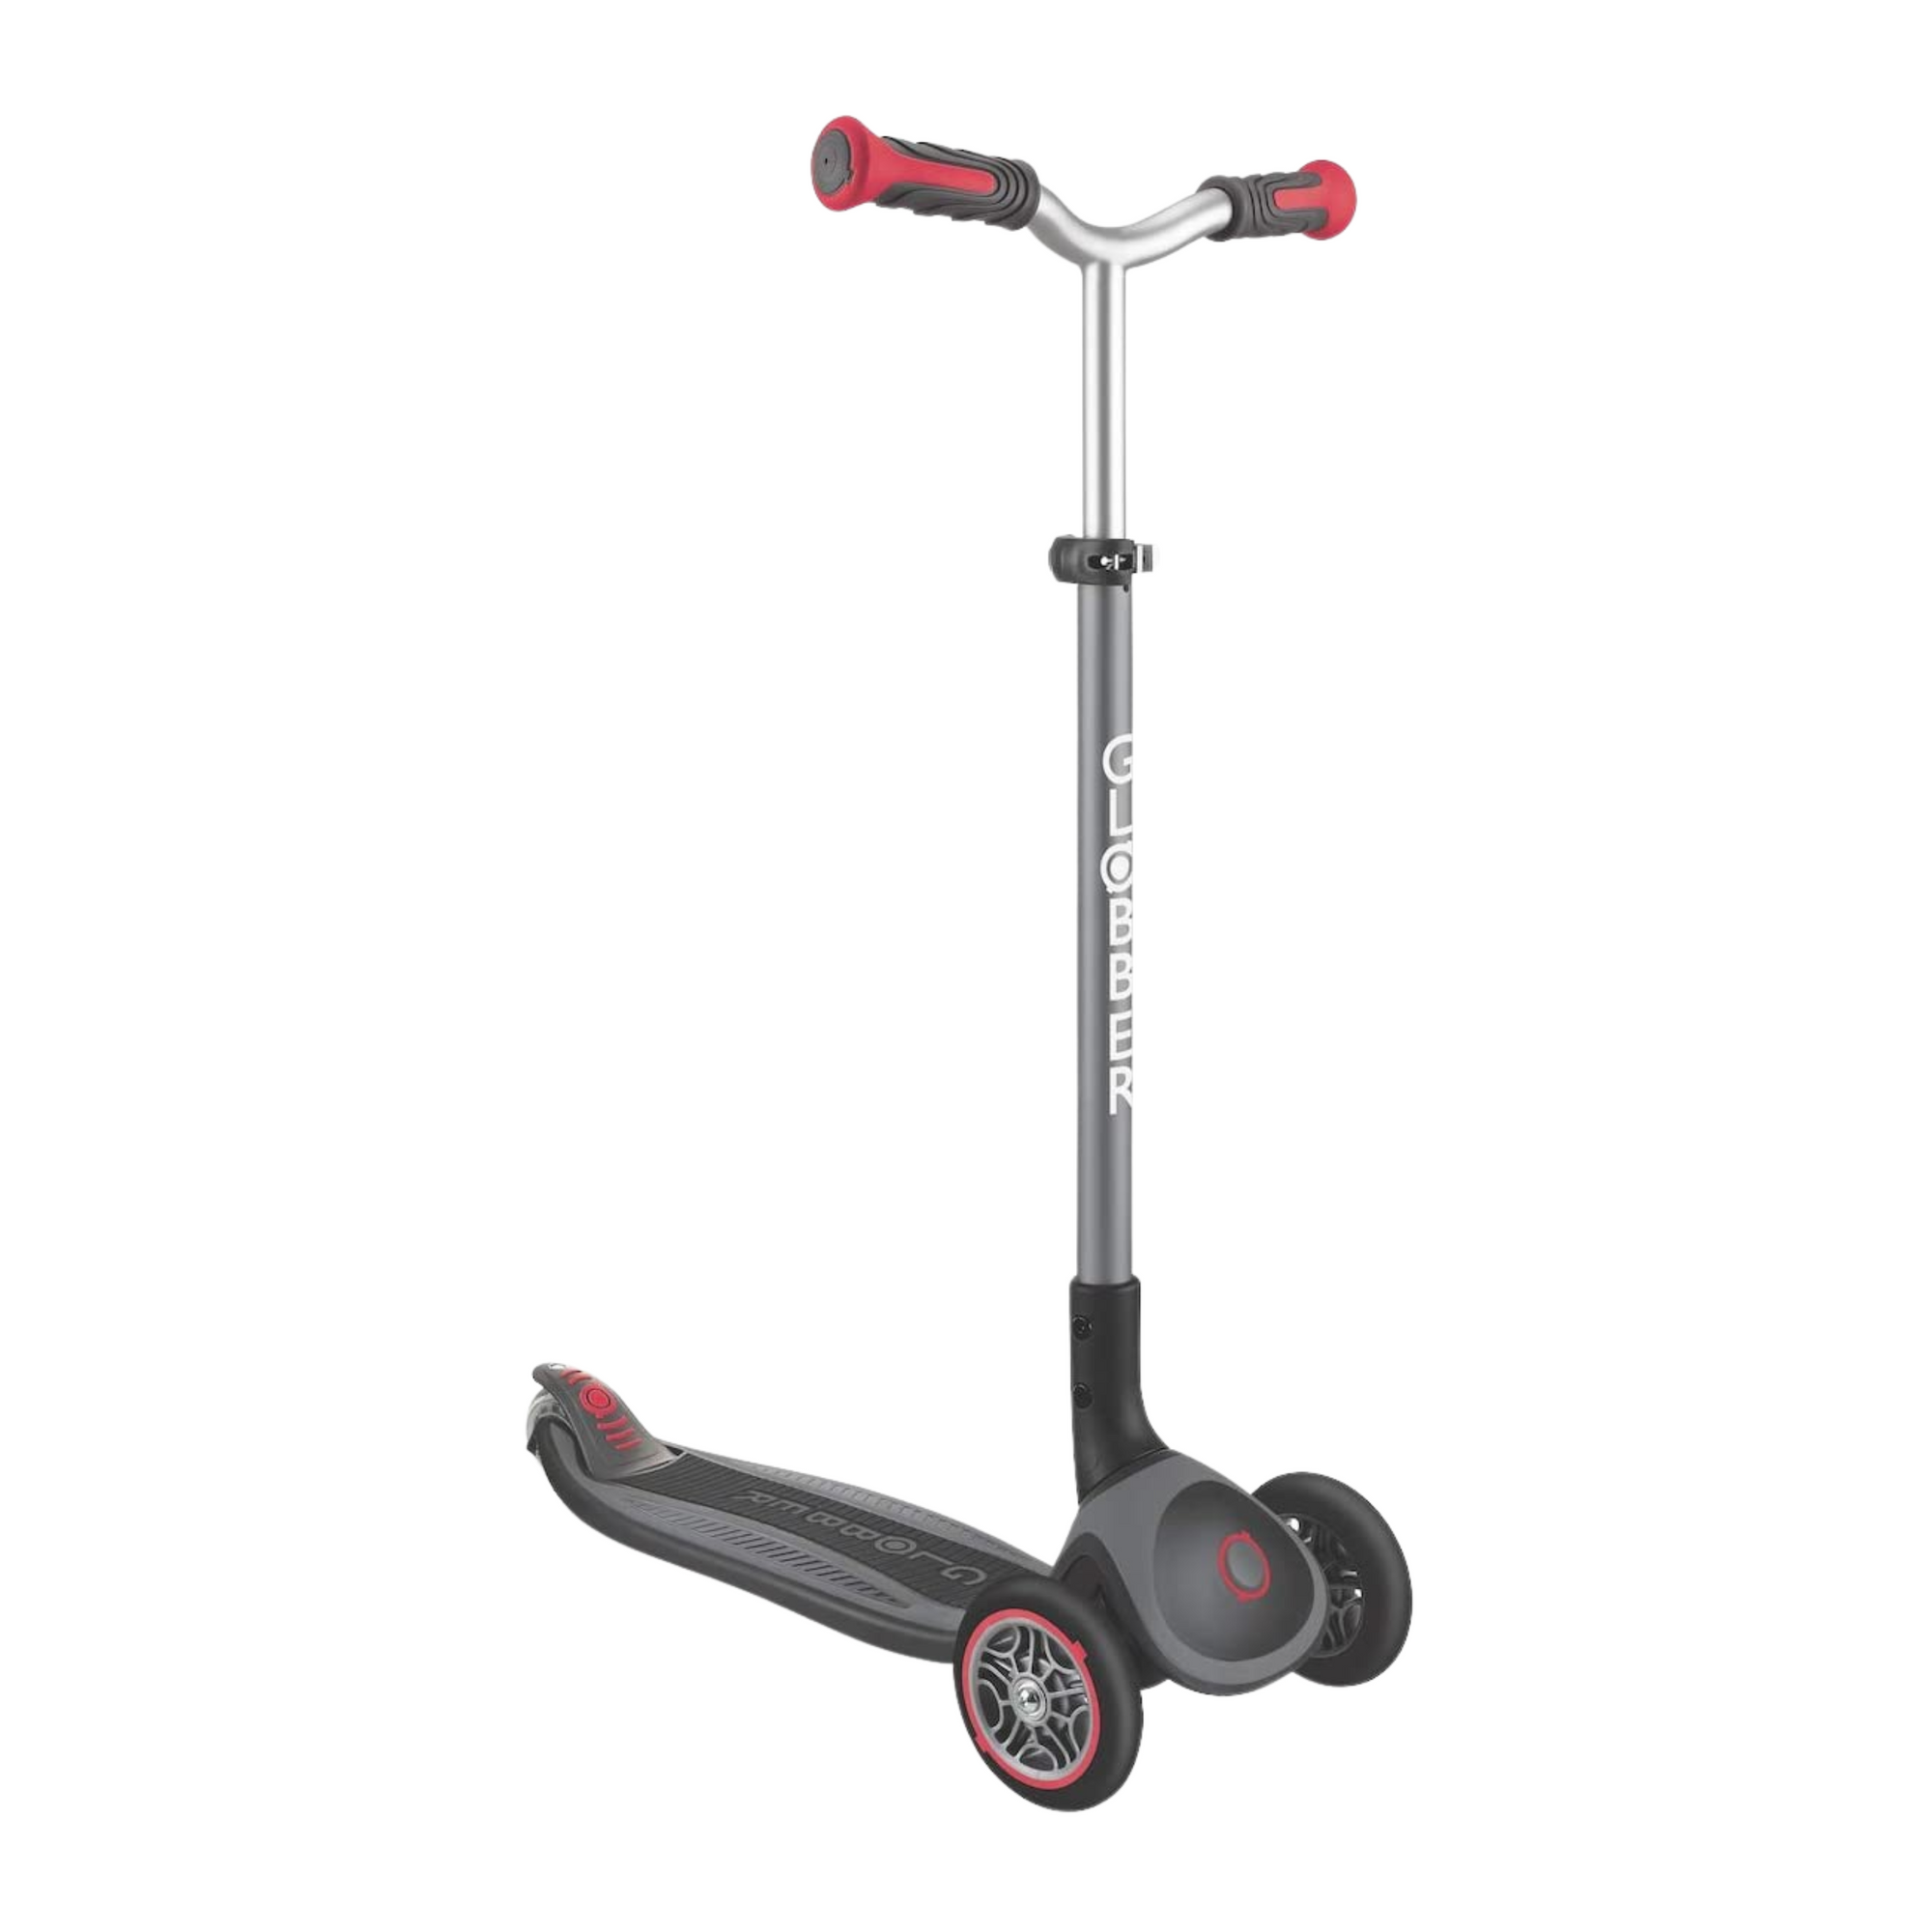 Scooter Globber Master gris con rojo